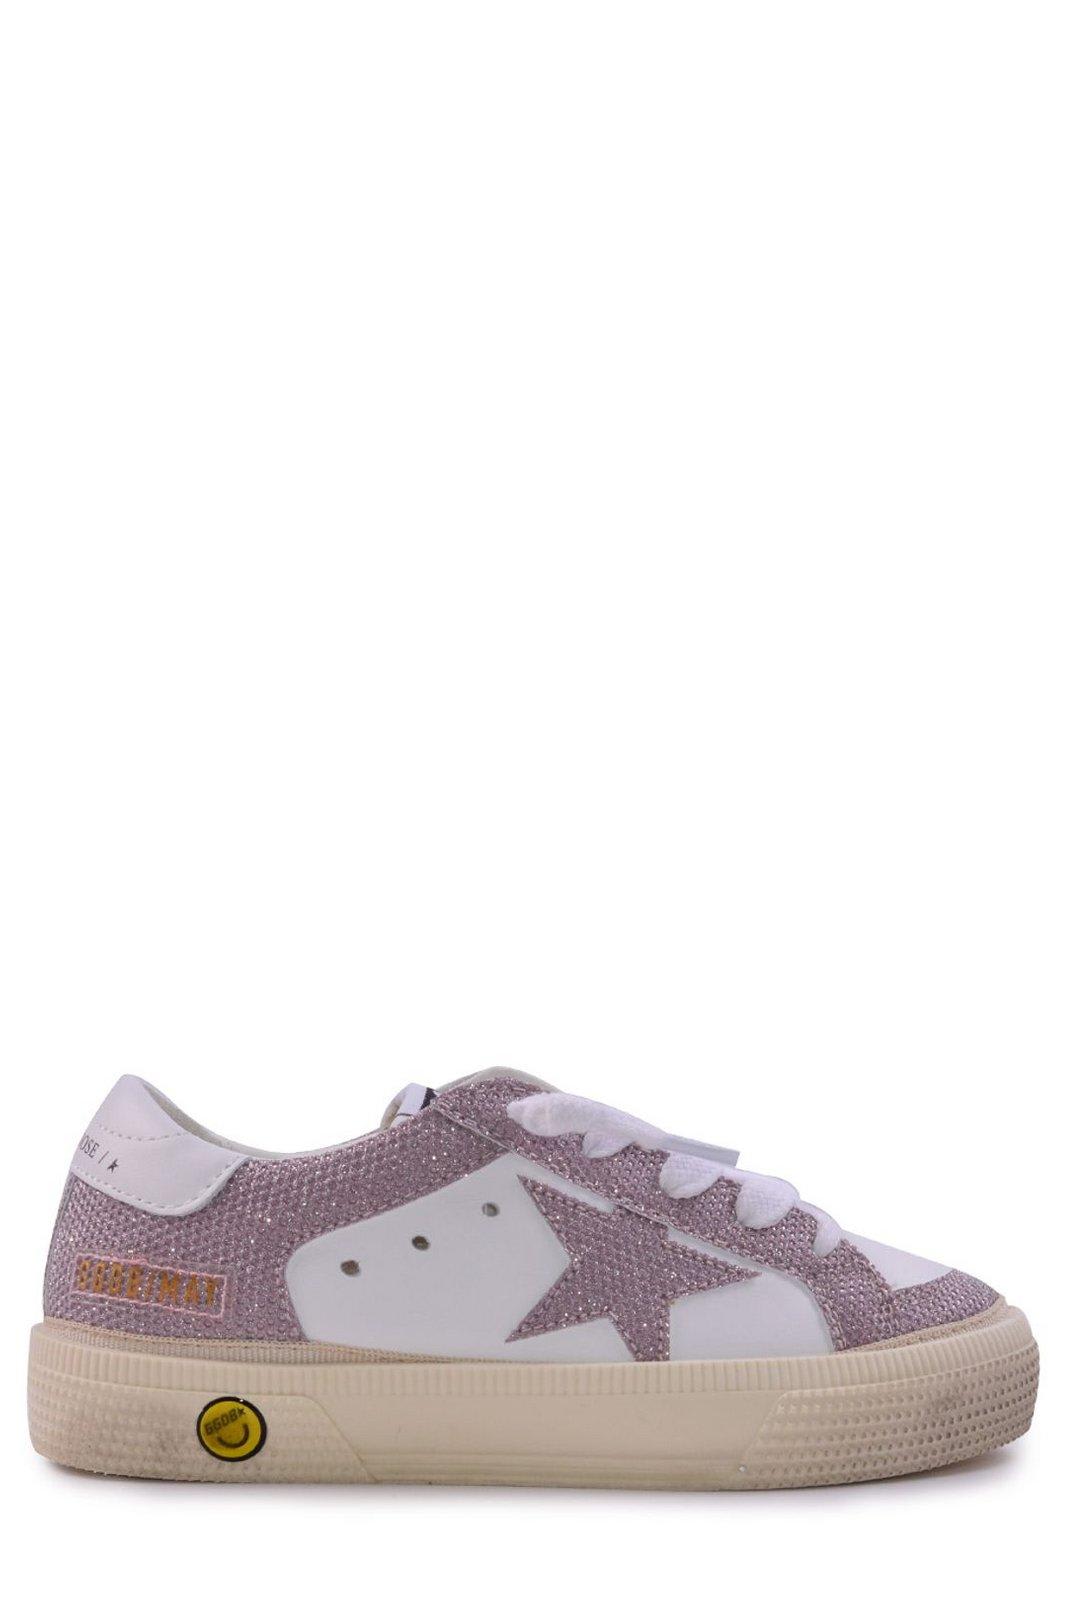 GOLDEN GOOSE GLITTER-DETAILED ROUND TOE SNEAKERS